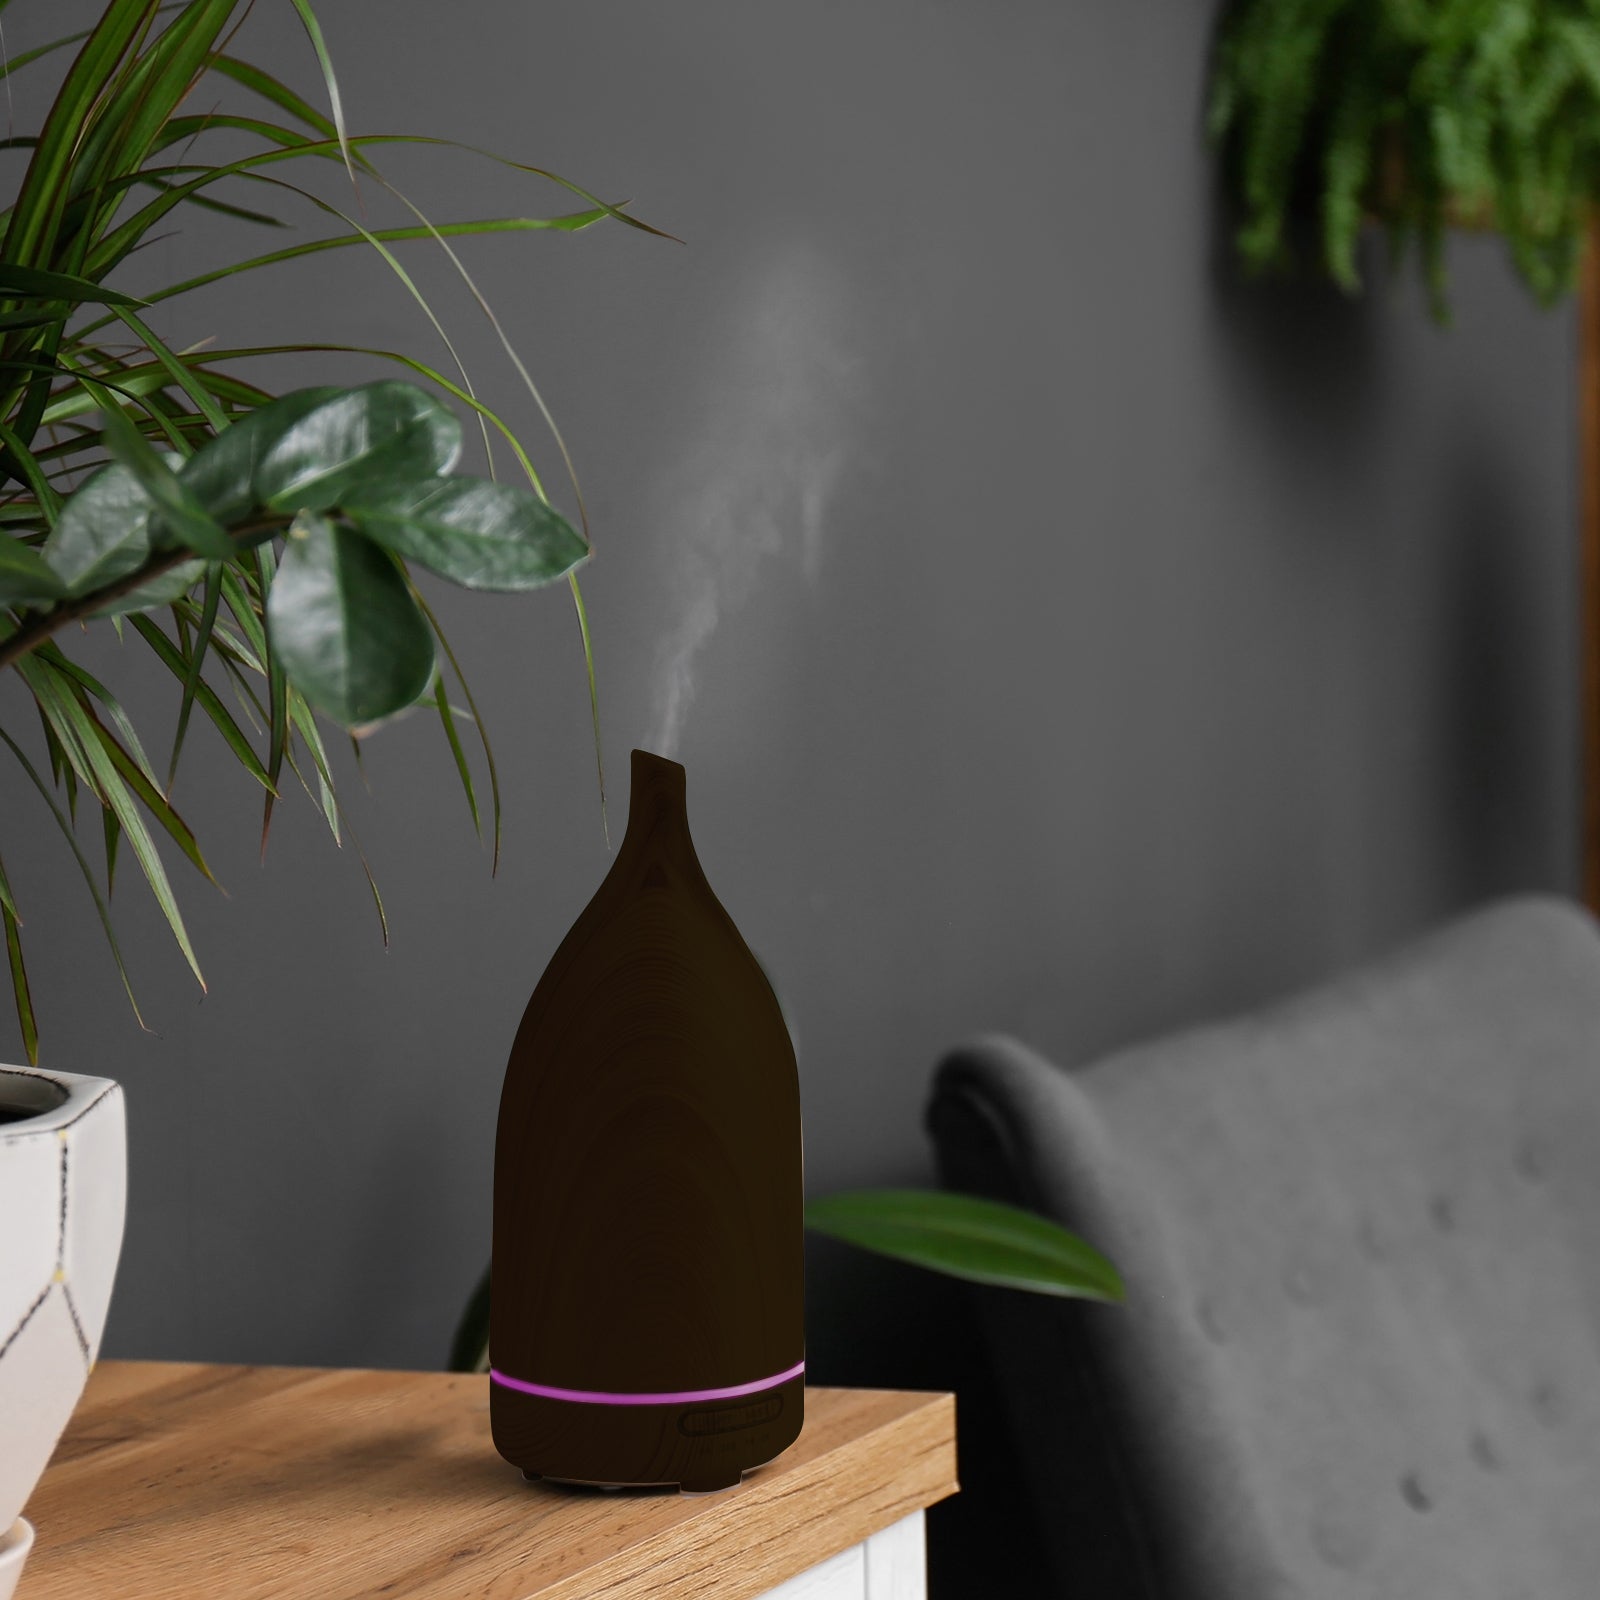 Milano Decor Aroma Diffuser 100ml Ultrasonic Humidifier Purifier And 3 Pack Oils - Dark Wood Deals499